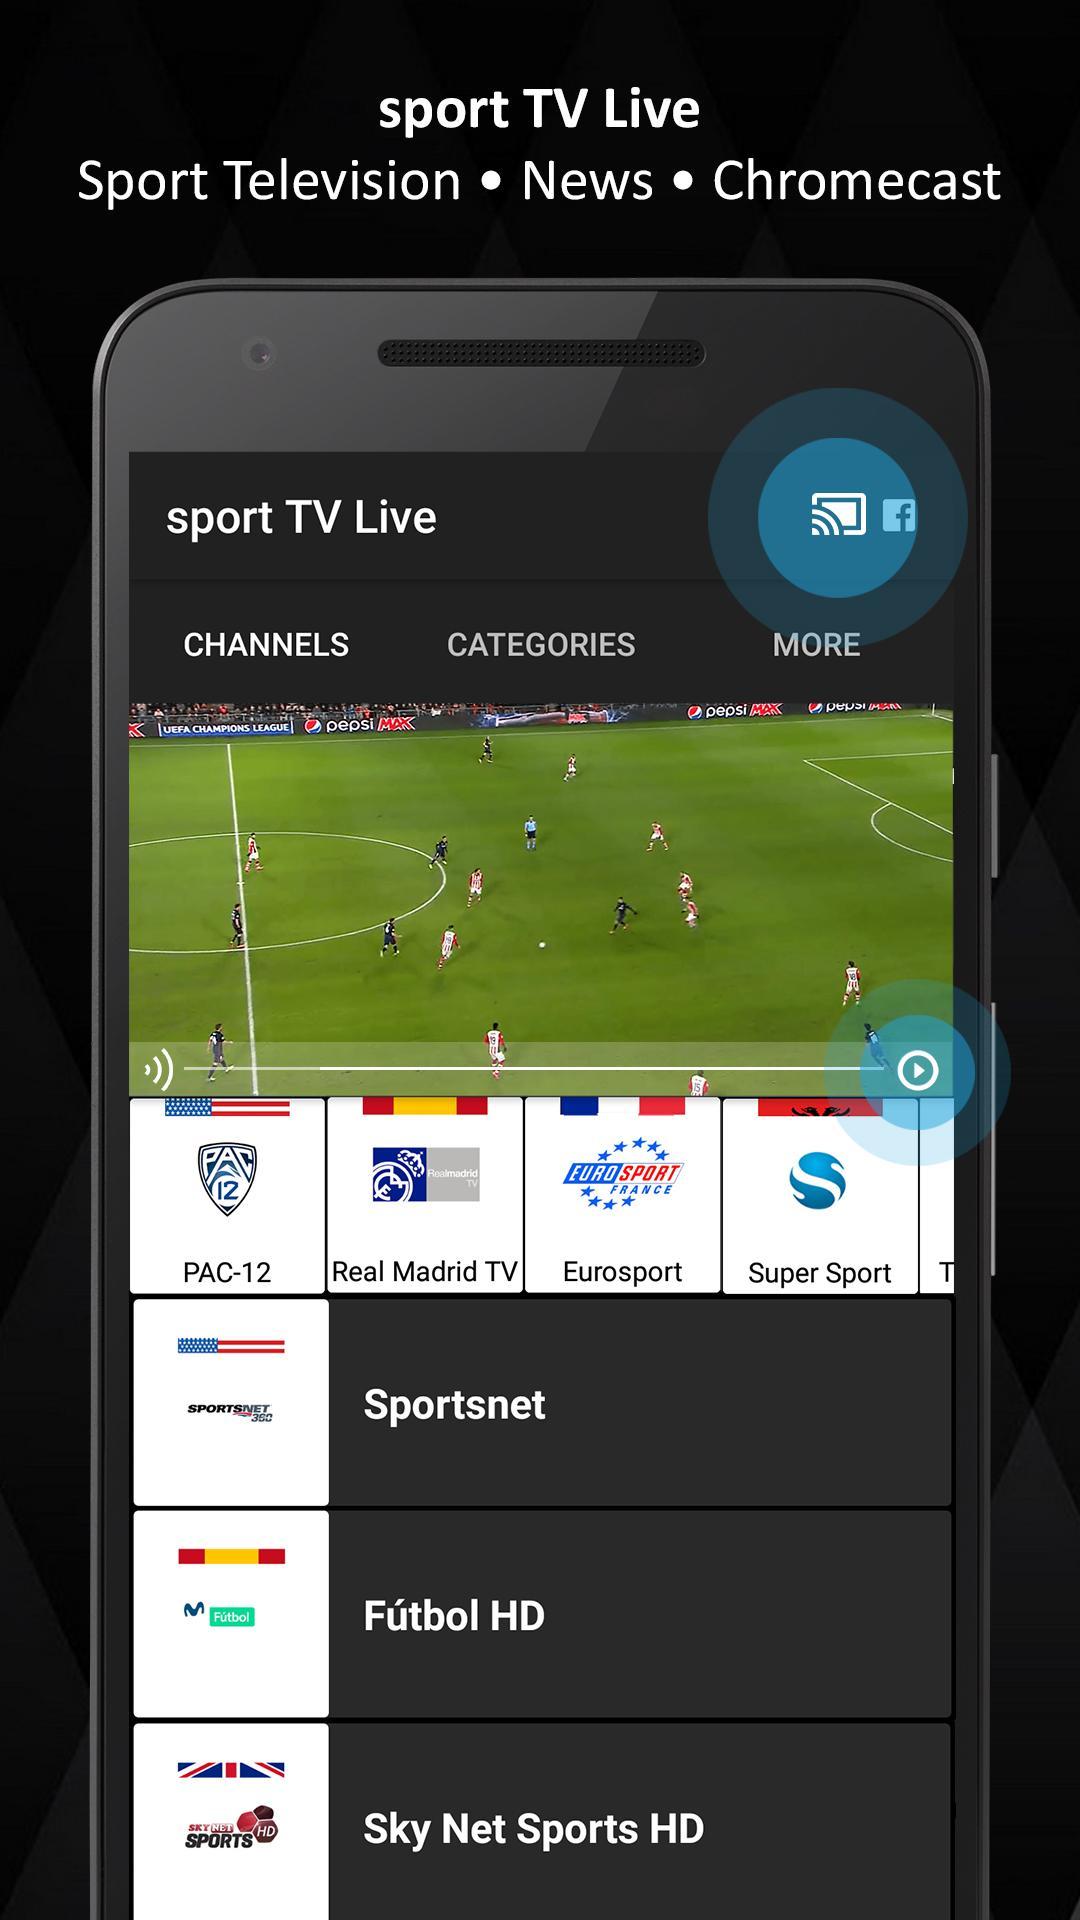 sport TV Live for Android - APK Download